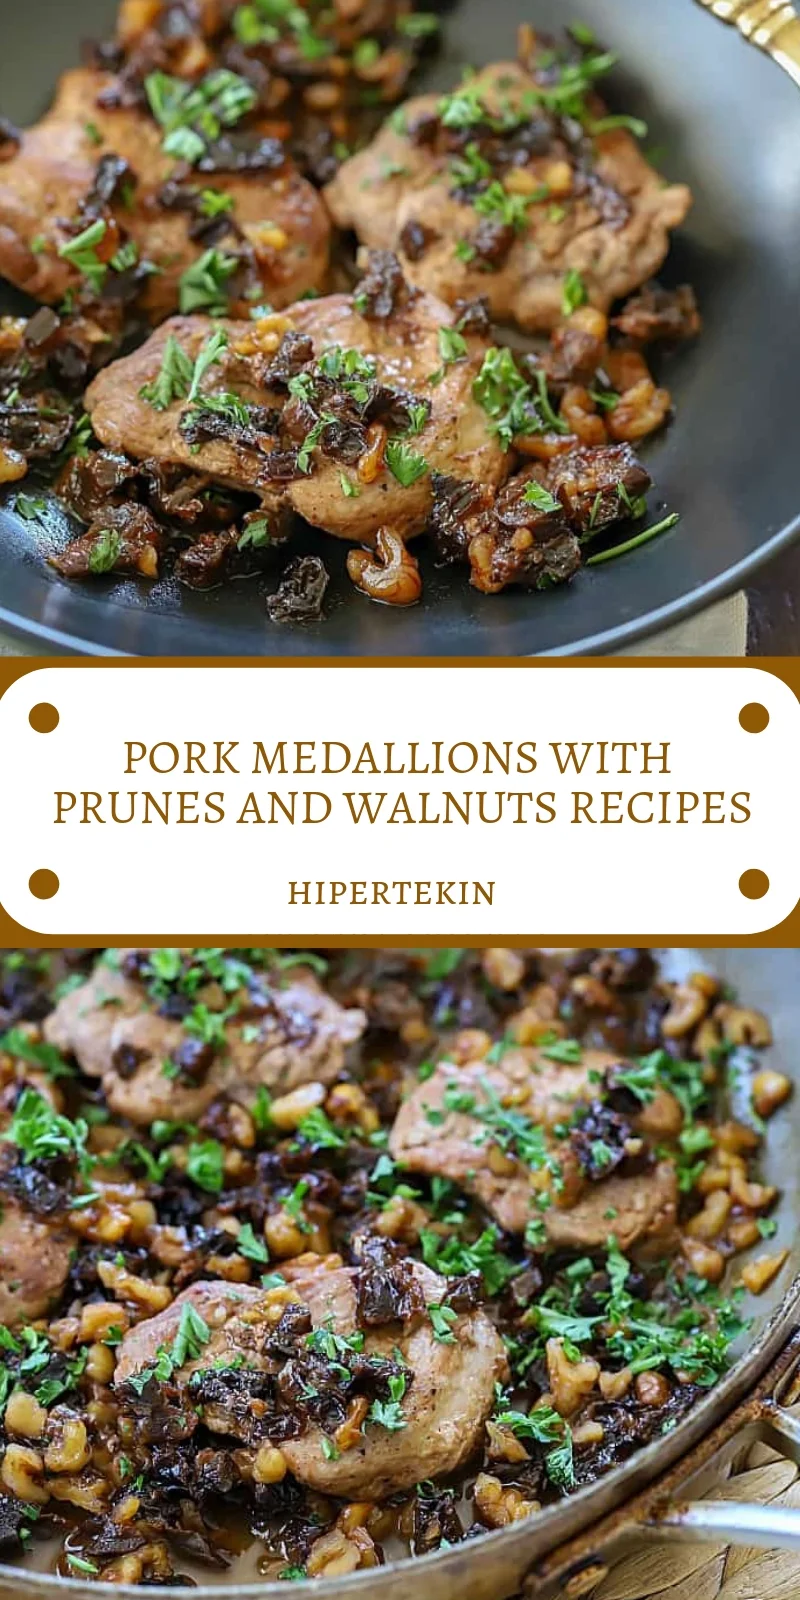 PORK MEDALLIONS WITH PRUNES AND WALNUTS RECIPES